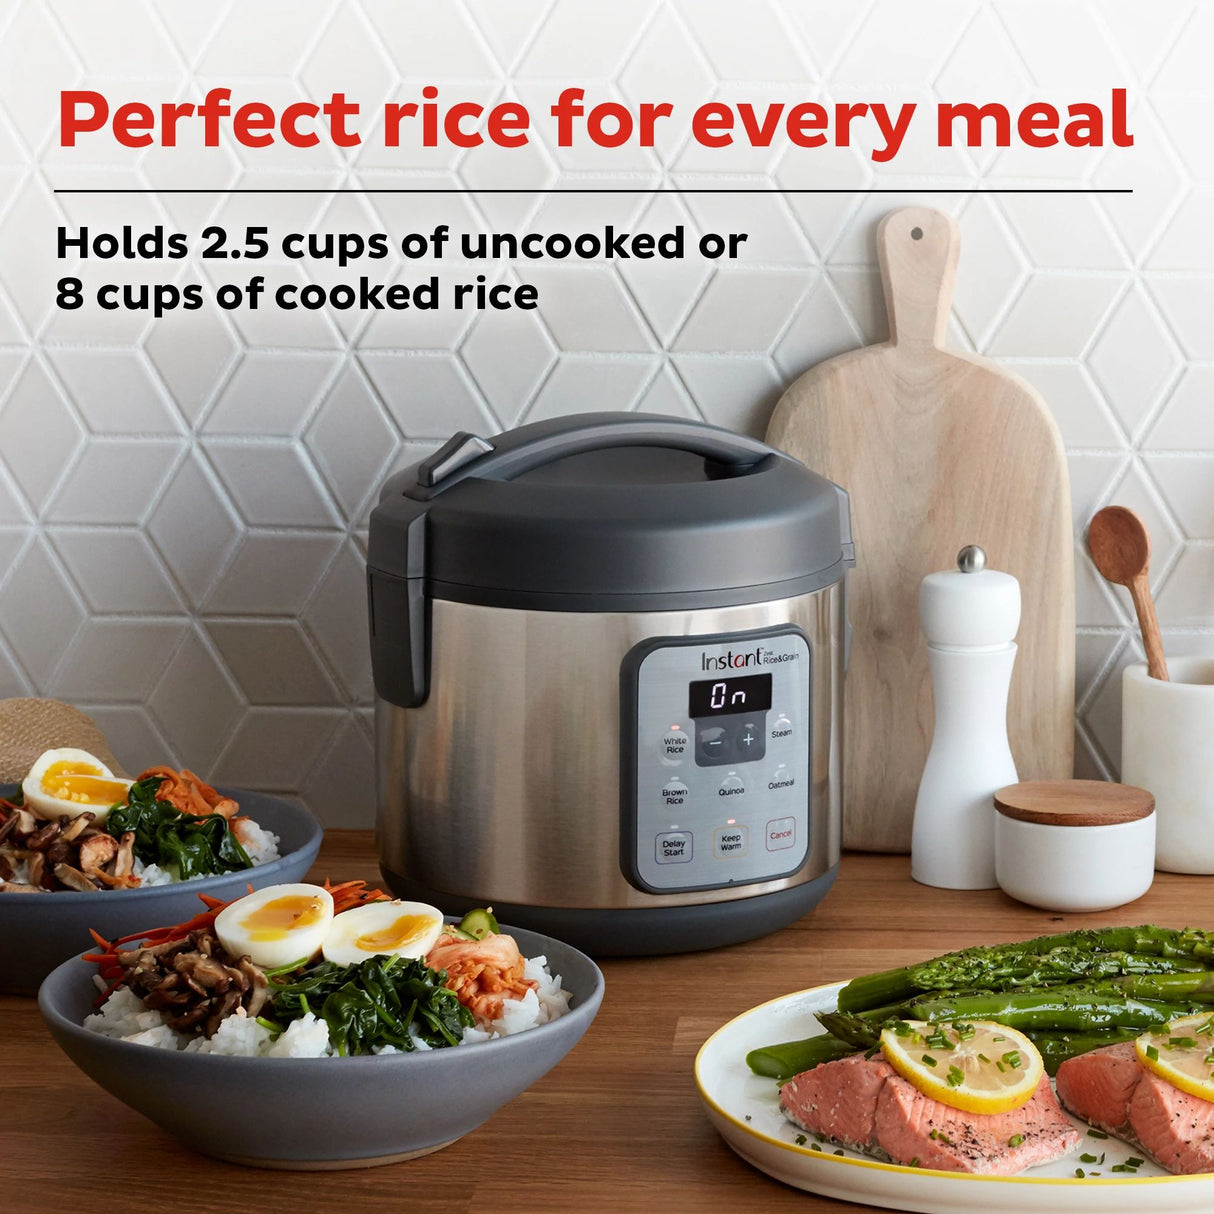  Instant Zest 8-cup Rice and Grain Cooker holds 2.5-cups uncooked or 8cups of cooked rice